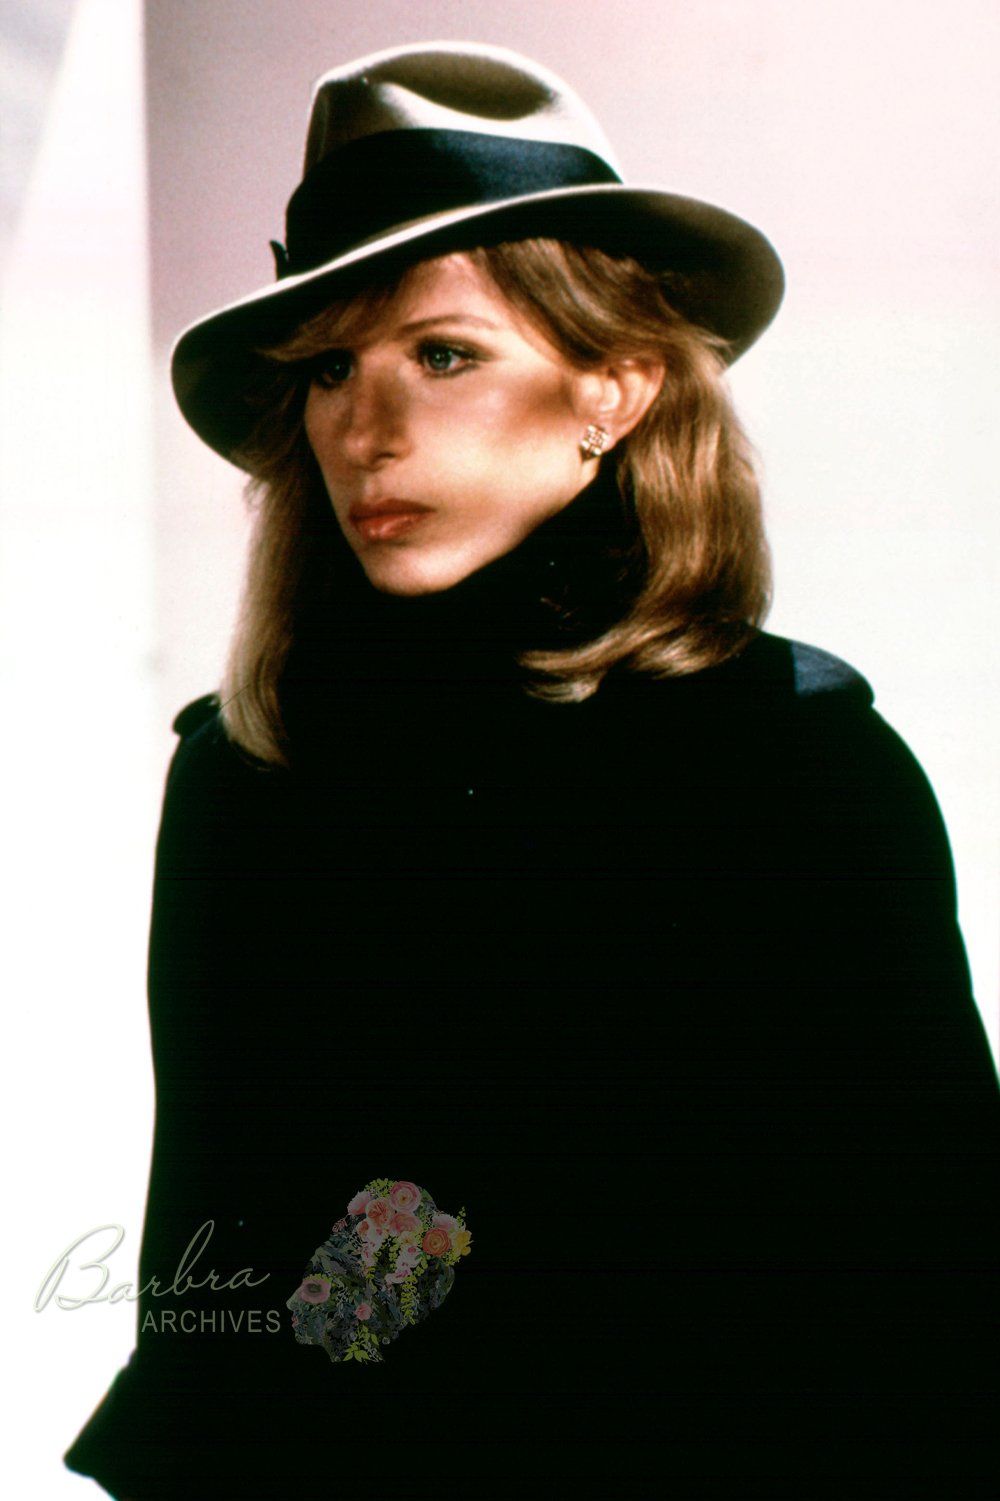 Streisand dressed in an undercover costume.